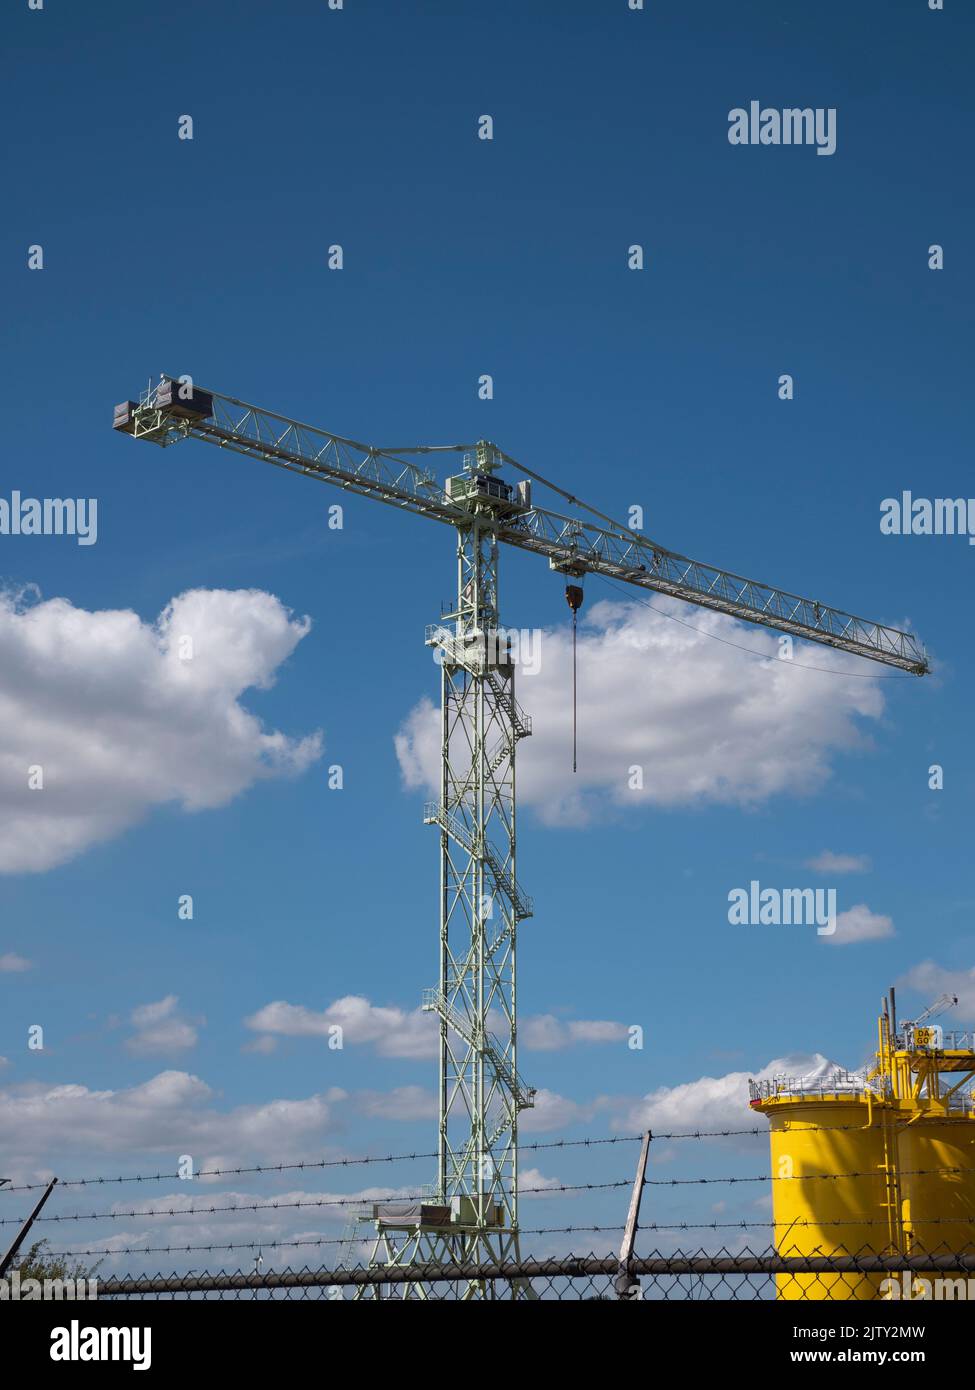 Large industrial crane with iron stairs and a blue cloudy sky Stock Photo